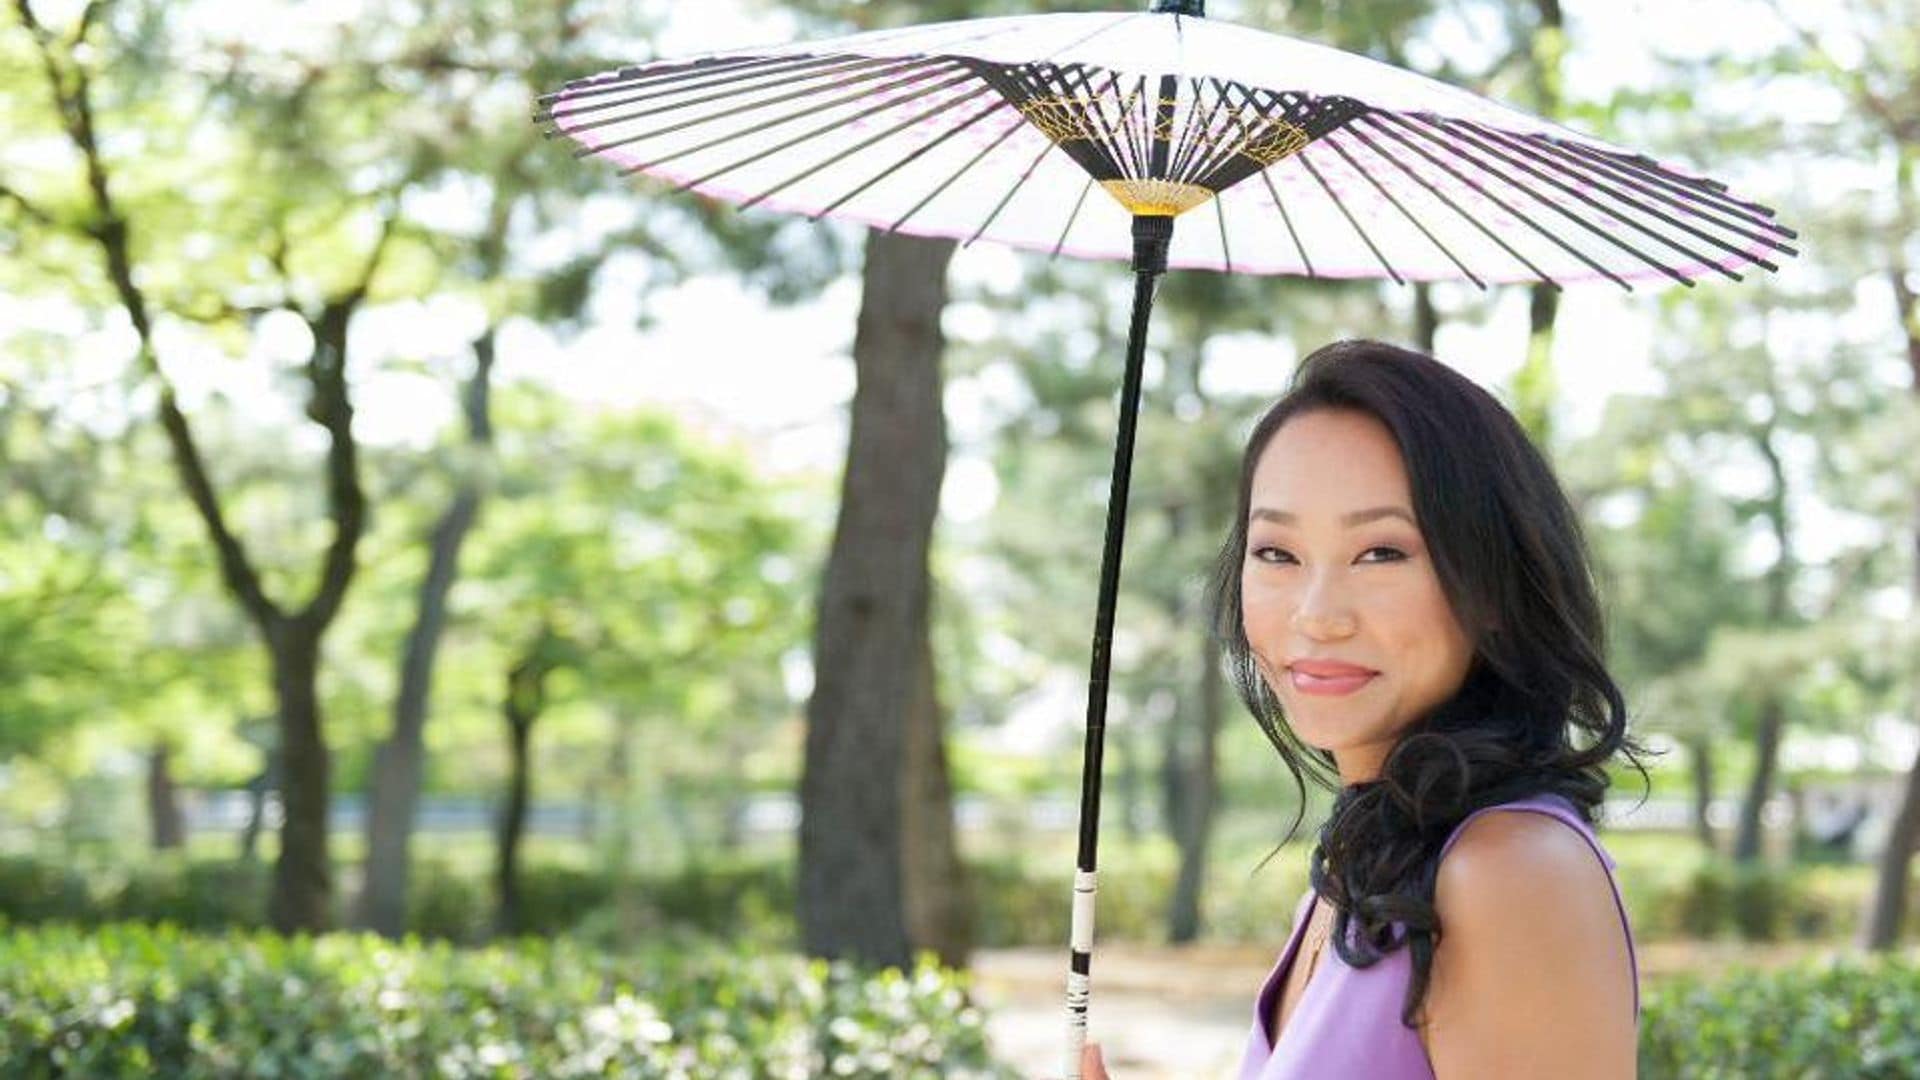 Tatcha Founder Vicky Tsai reveals her Geisha-approved beauty tips, wellness routine and more